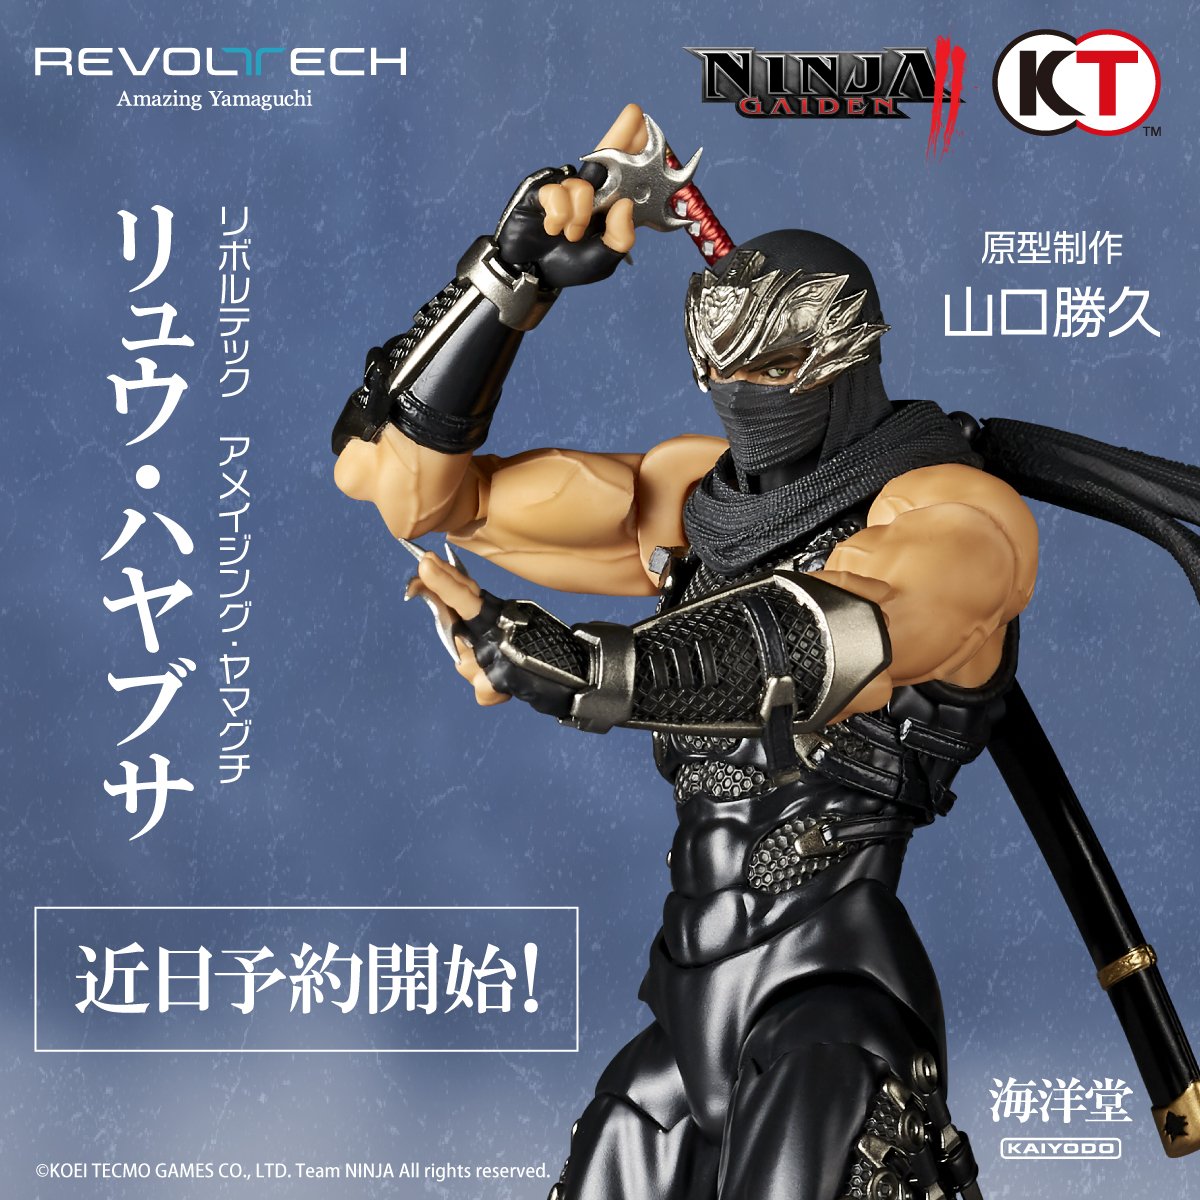 Kaiyodo x Koei Tecmo Games
From the super-fast ninja action game series 'NINJA GAIDEN', the modern ninja 'Ryu 
Hayabusa', who has the blood of the Dragon Clan, will be an action figure in Kaiyodo's 
Revoltech Amazing Yamaguchi series!
Detailed product information will be released…